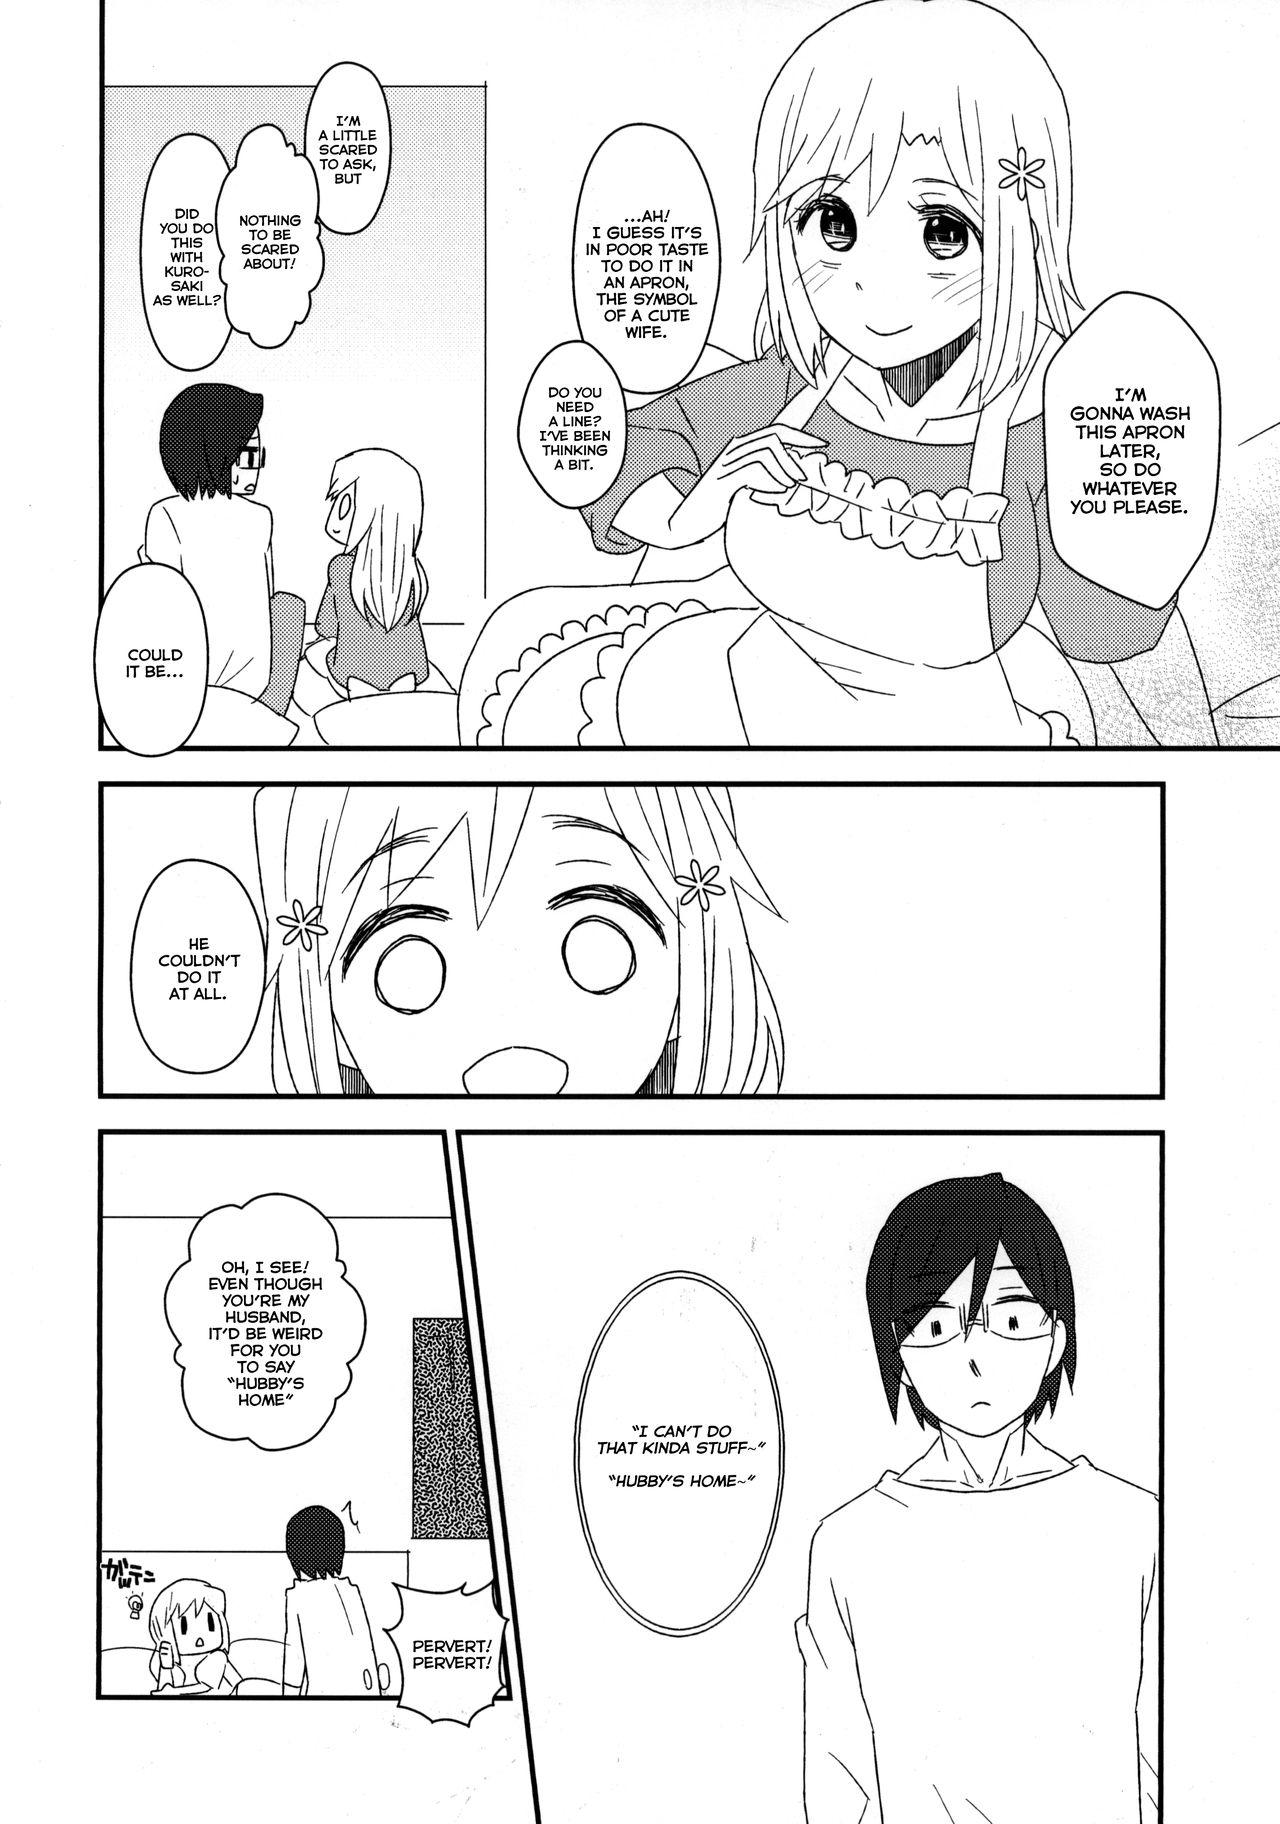 Sweet ReMarriage - Bleach Blond - Page 7